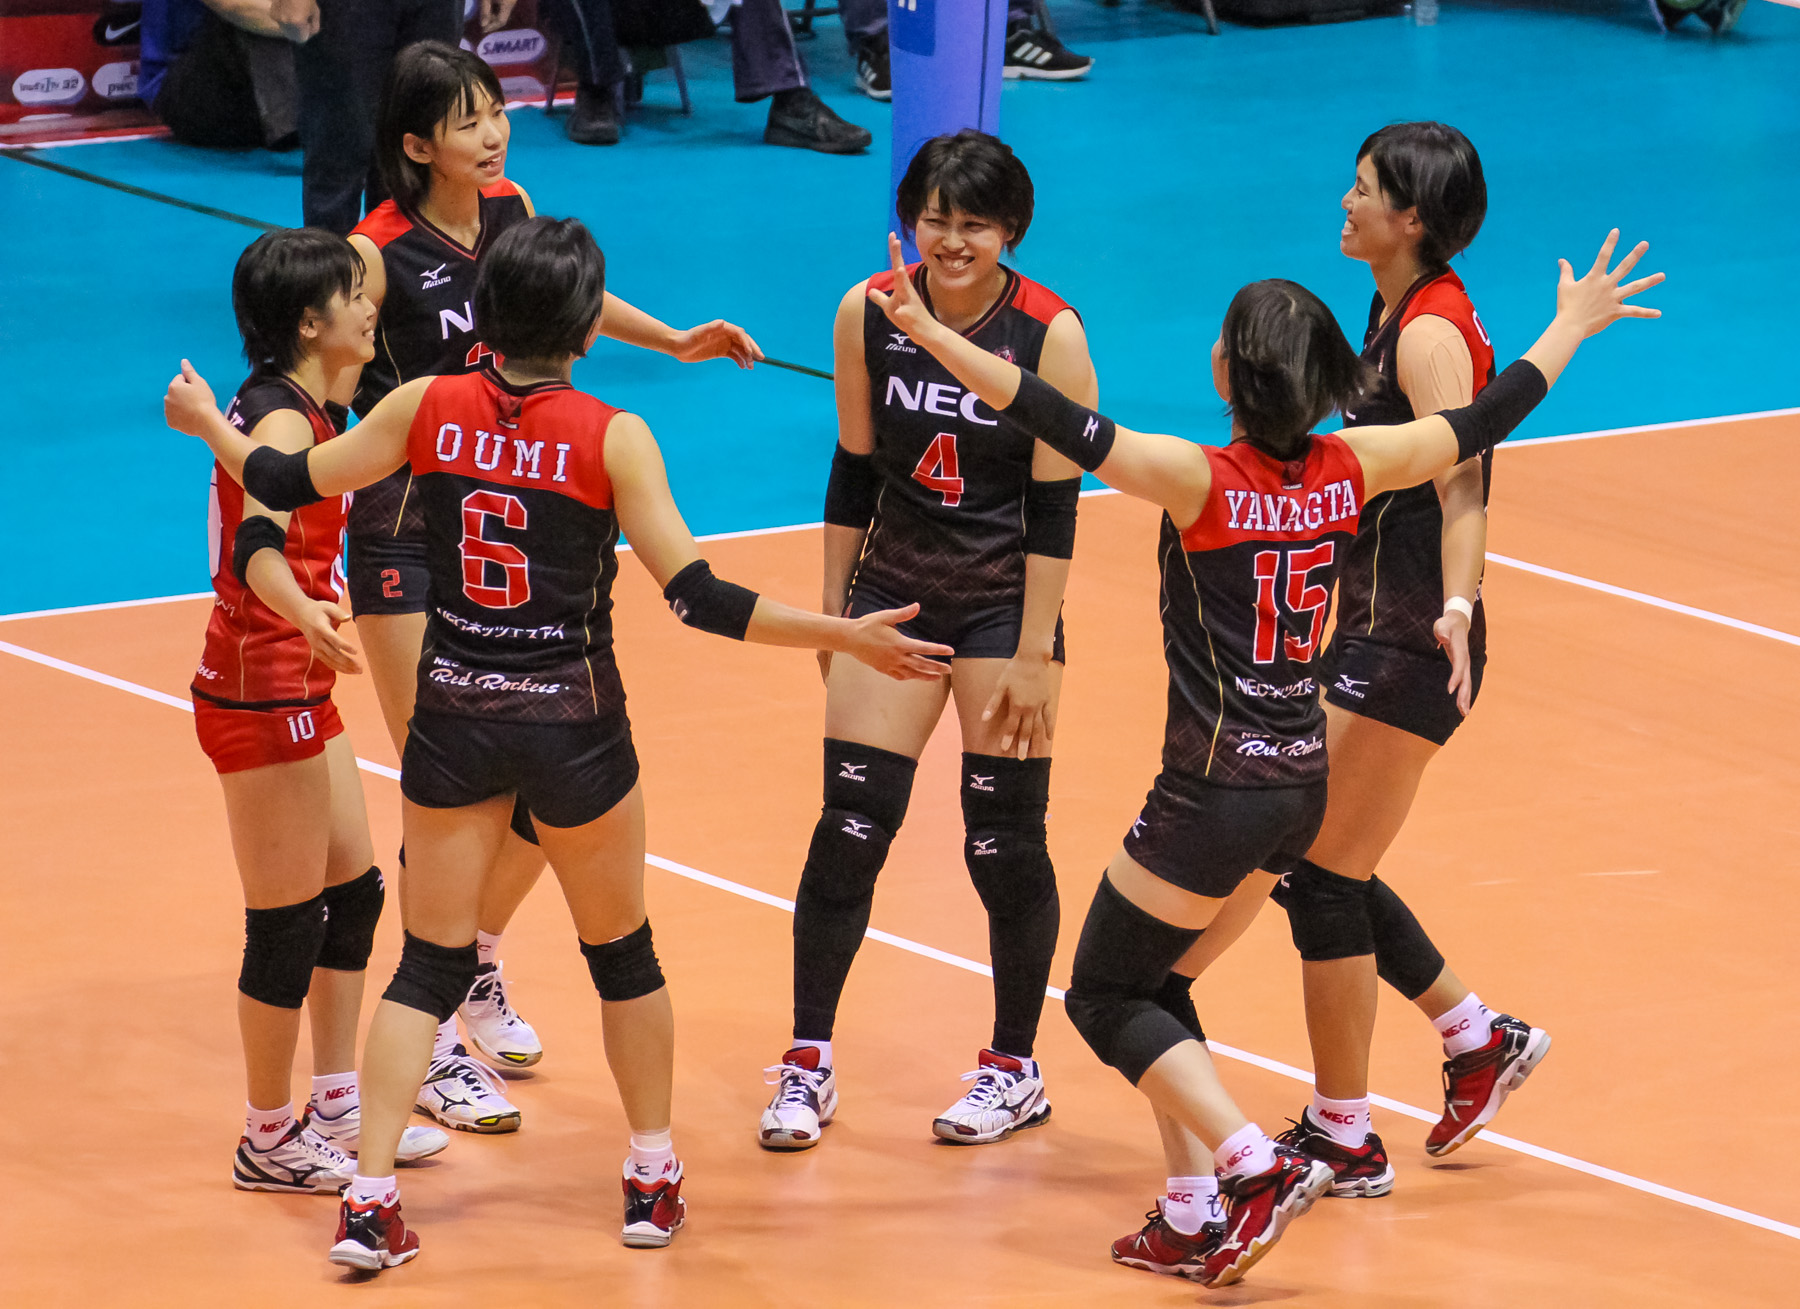 Japan Nec Red Rockets in the AVC Asian Women's volleyball tournament.